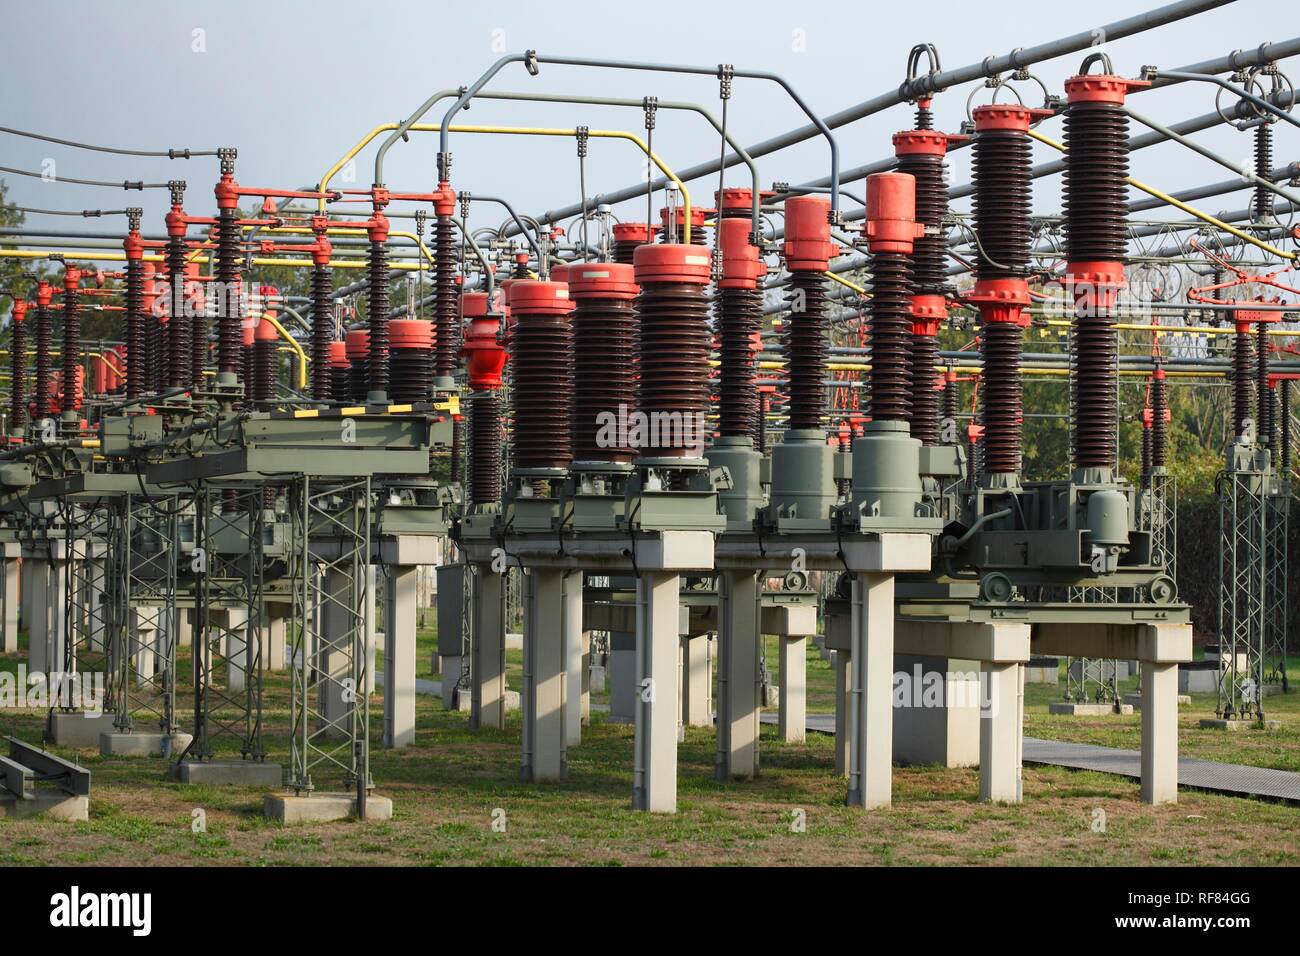 Isolators at an electrical substation, Bremen, Germany Stock Photo